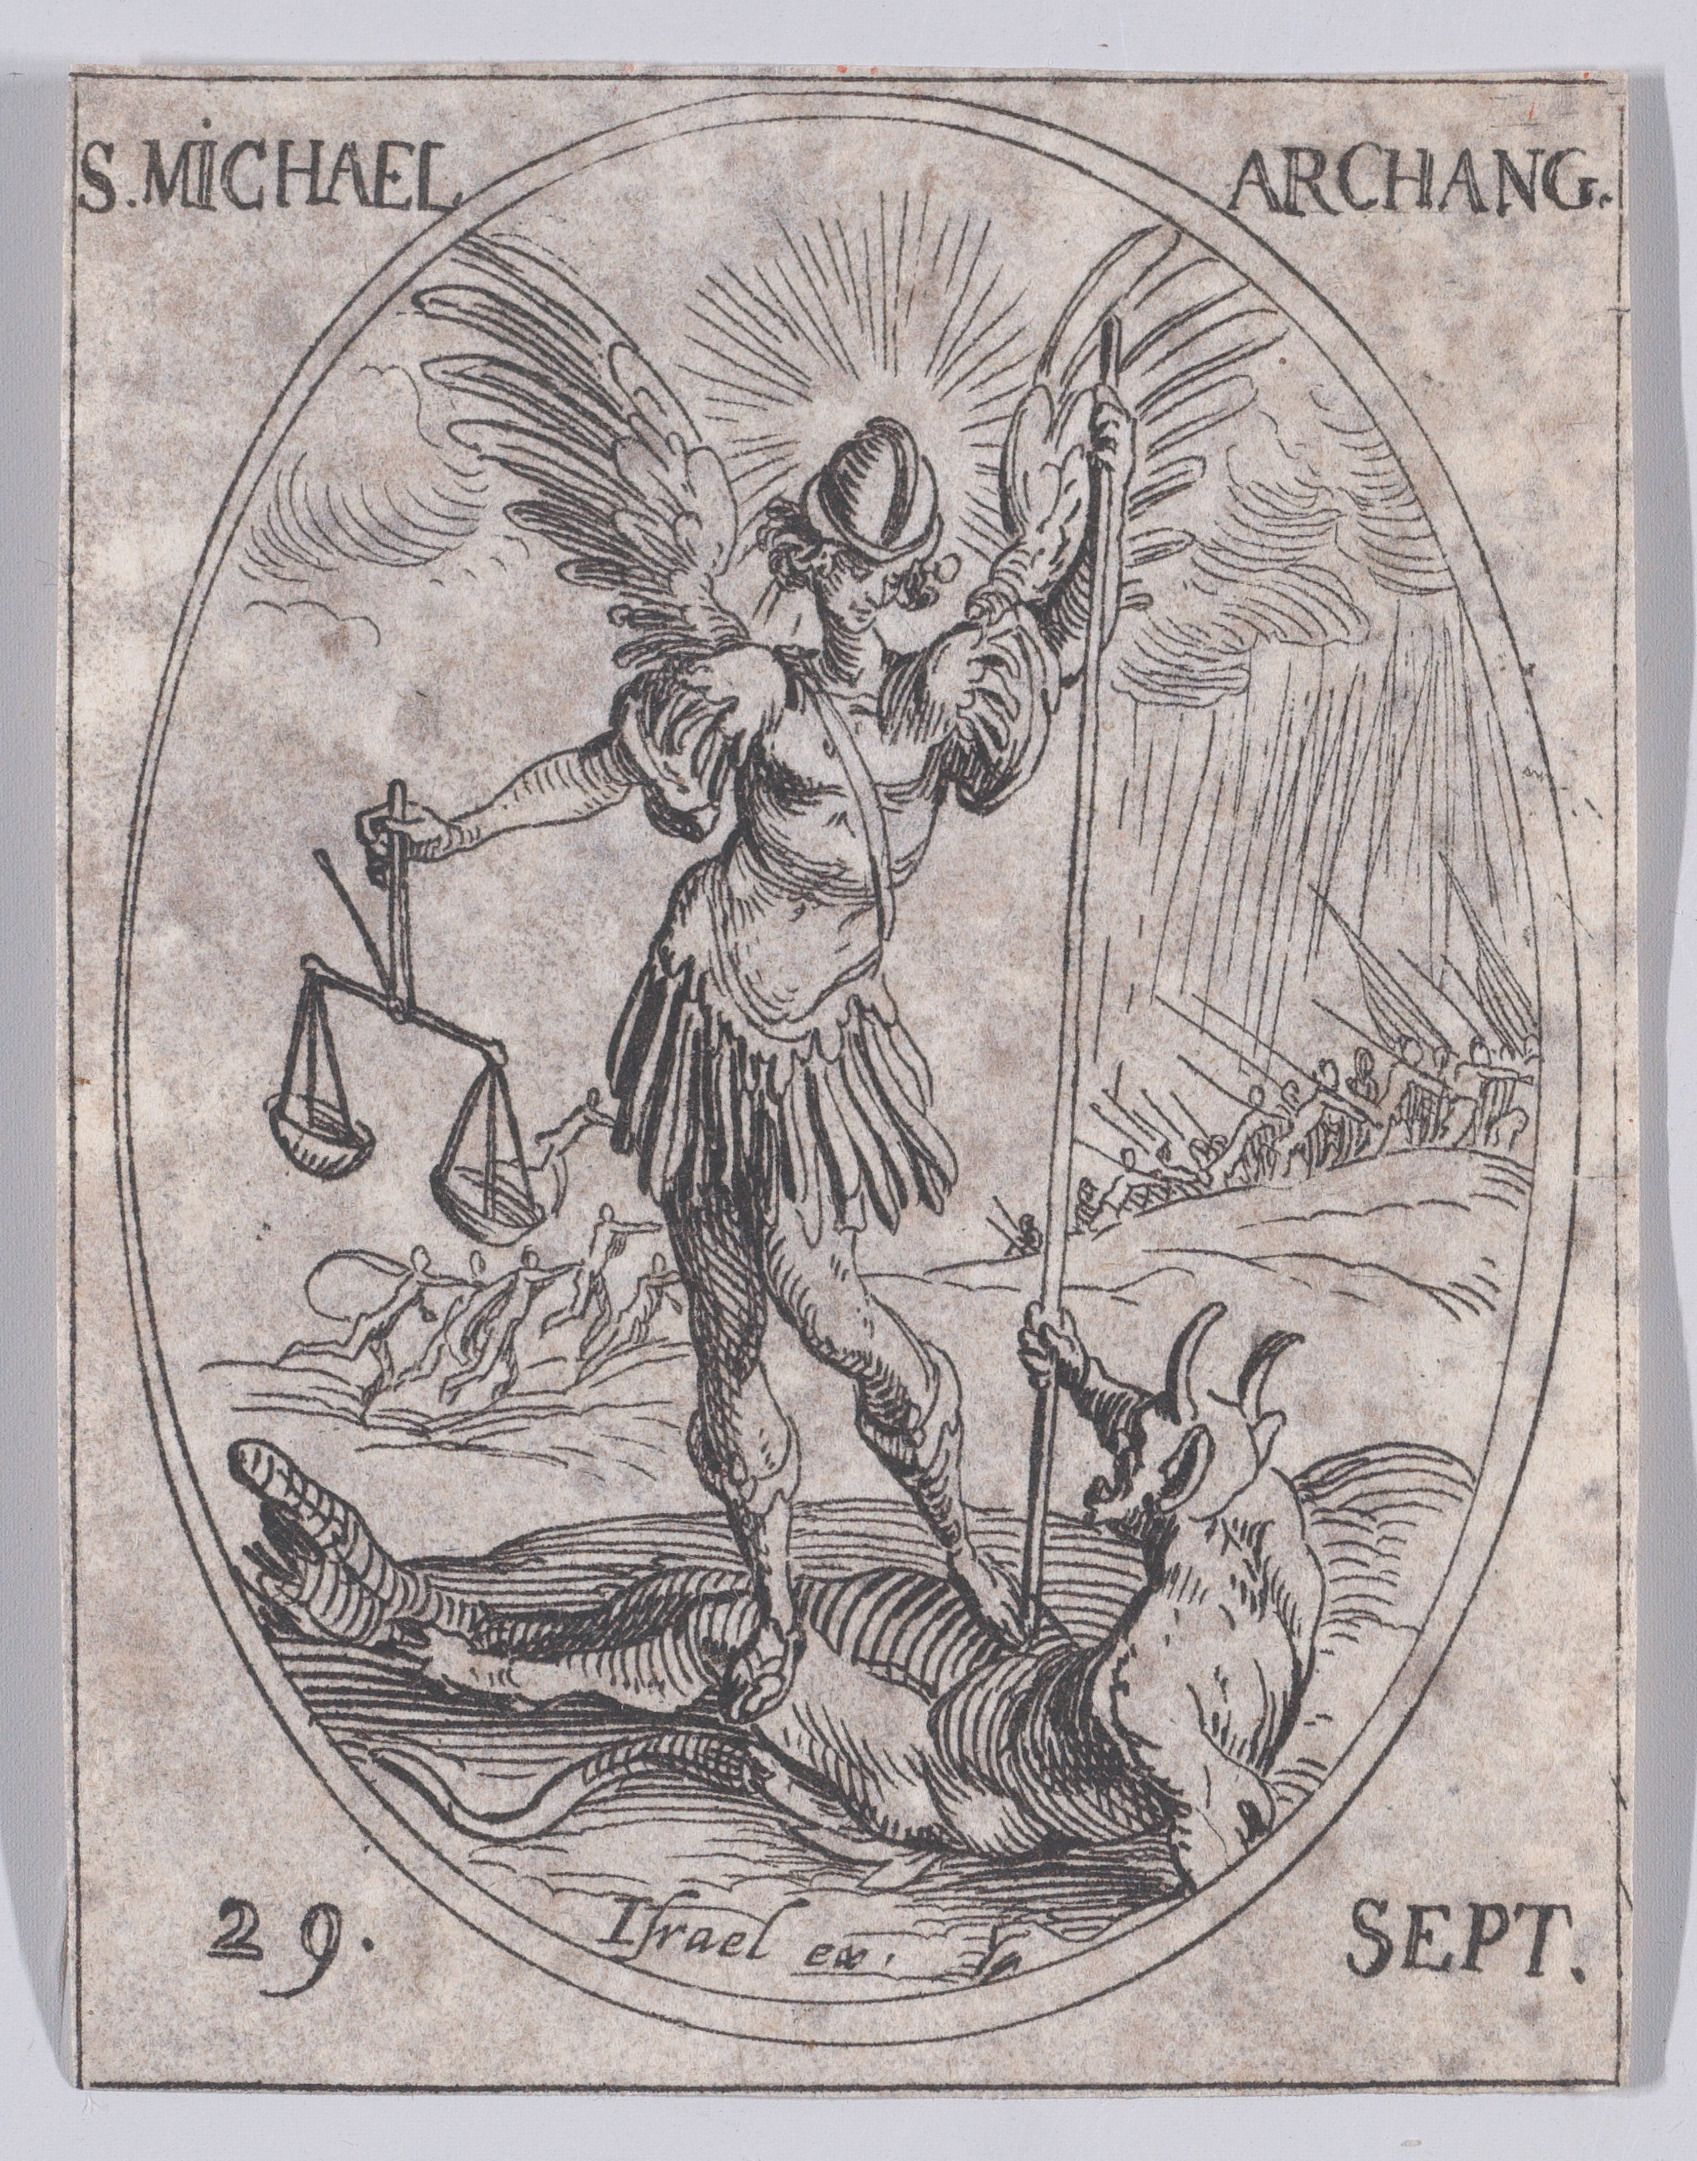 S. Michel, archange (St. Michael, Archangel), September 29th, from Les Images De Tous Les Saincts et Saintes de L'Année (Images of All of the Saints and Religious Events of the Year), Jacques Callot (French, Nancy 1592–1635 Nancy), Etching; second state of two (Lieure)